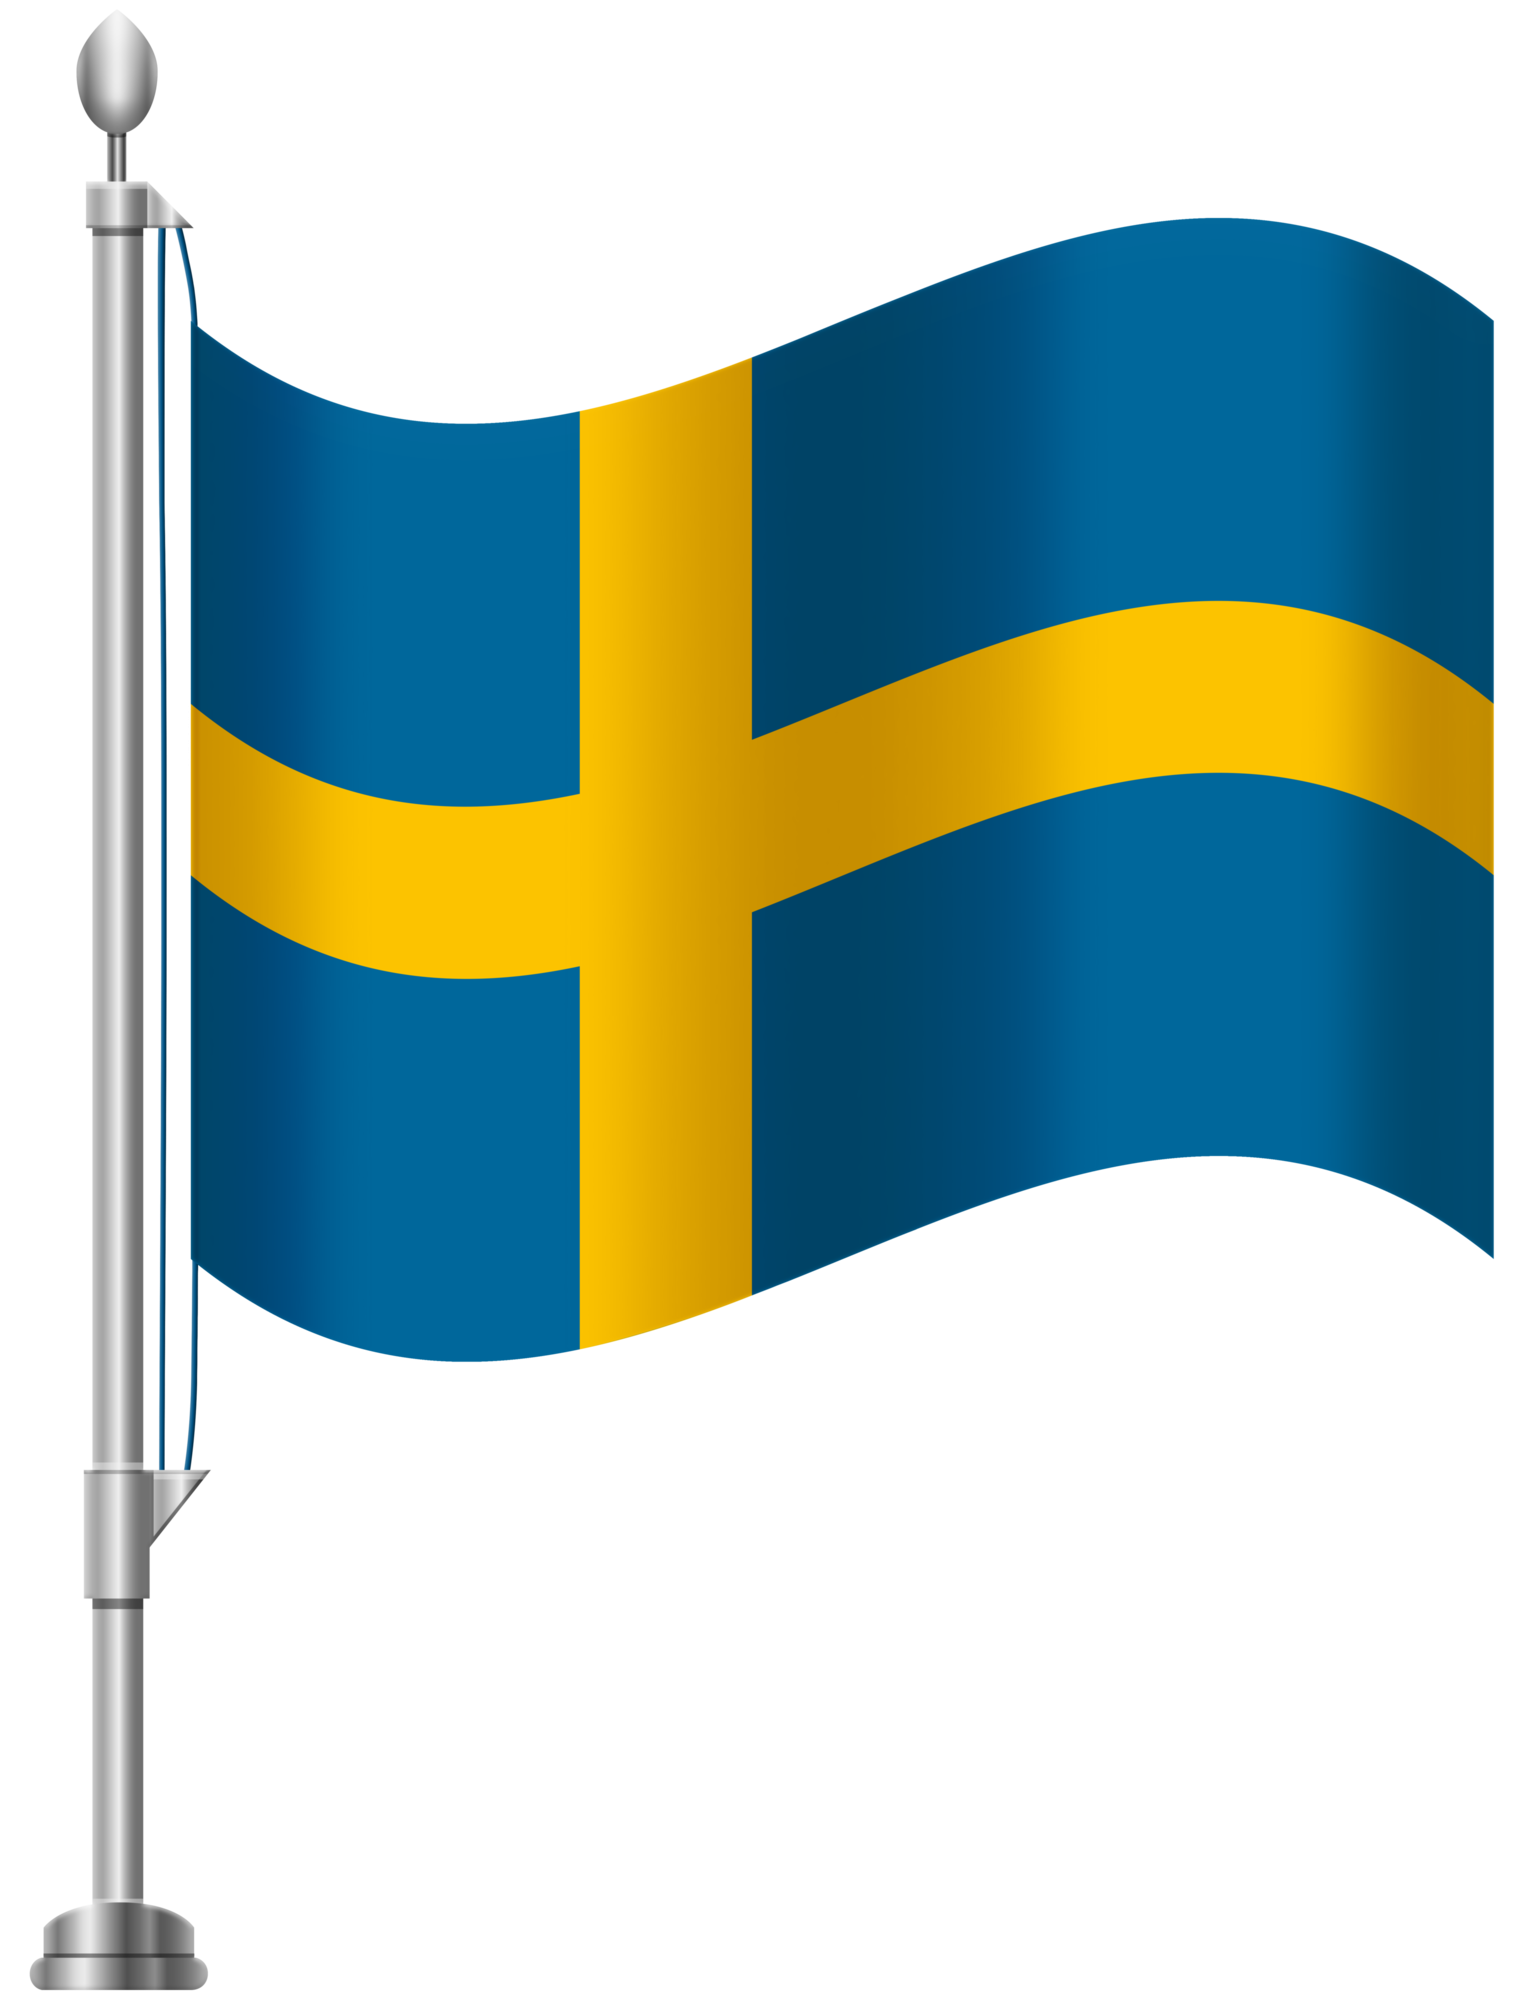 Sweden group flag png. Handprint clipart colored pencil